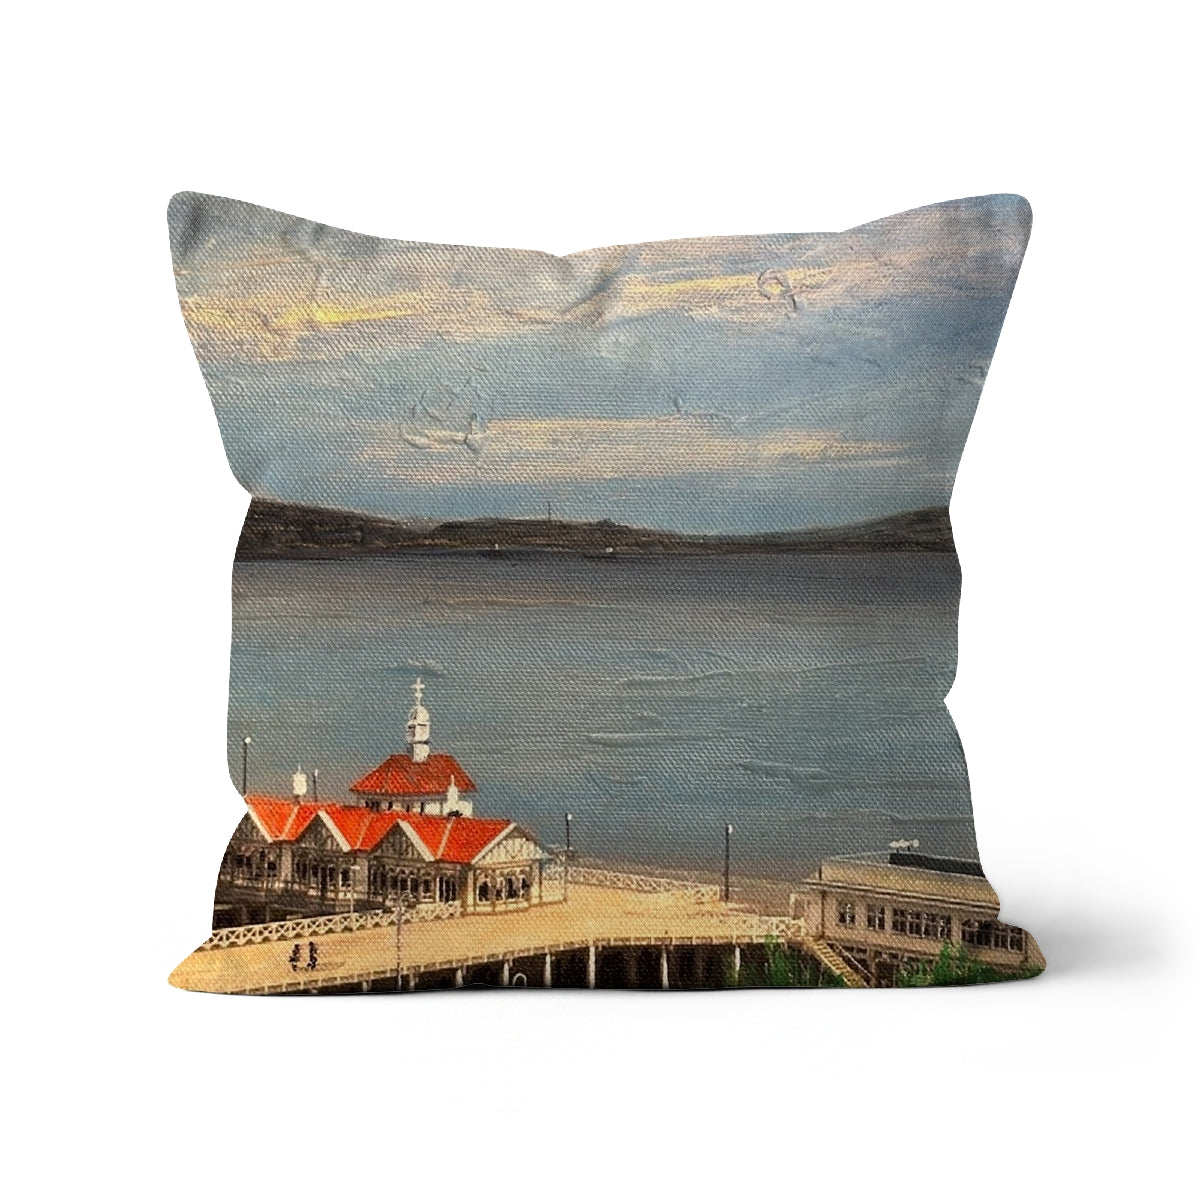 Looking From Dunoon Art Gifts Cushion-Cushions-River Clyde Art Gallery-Canvas-16"x16"-Paintings, Prints, Homeware, Art Gifts From Scotland By Scottish Artist Kevin Hunter